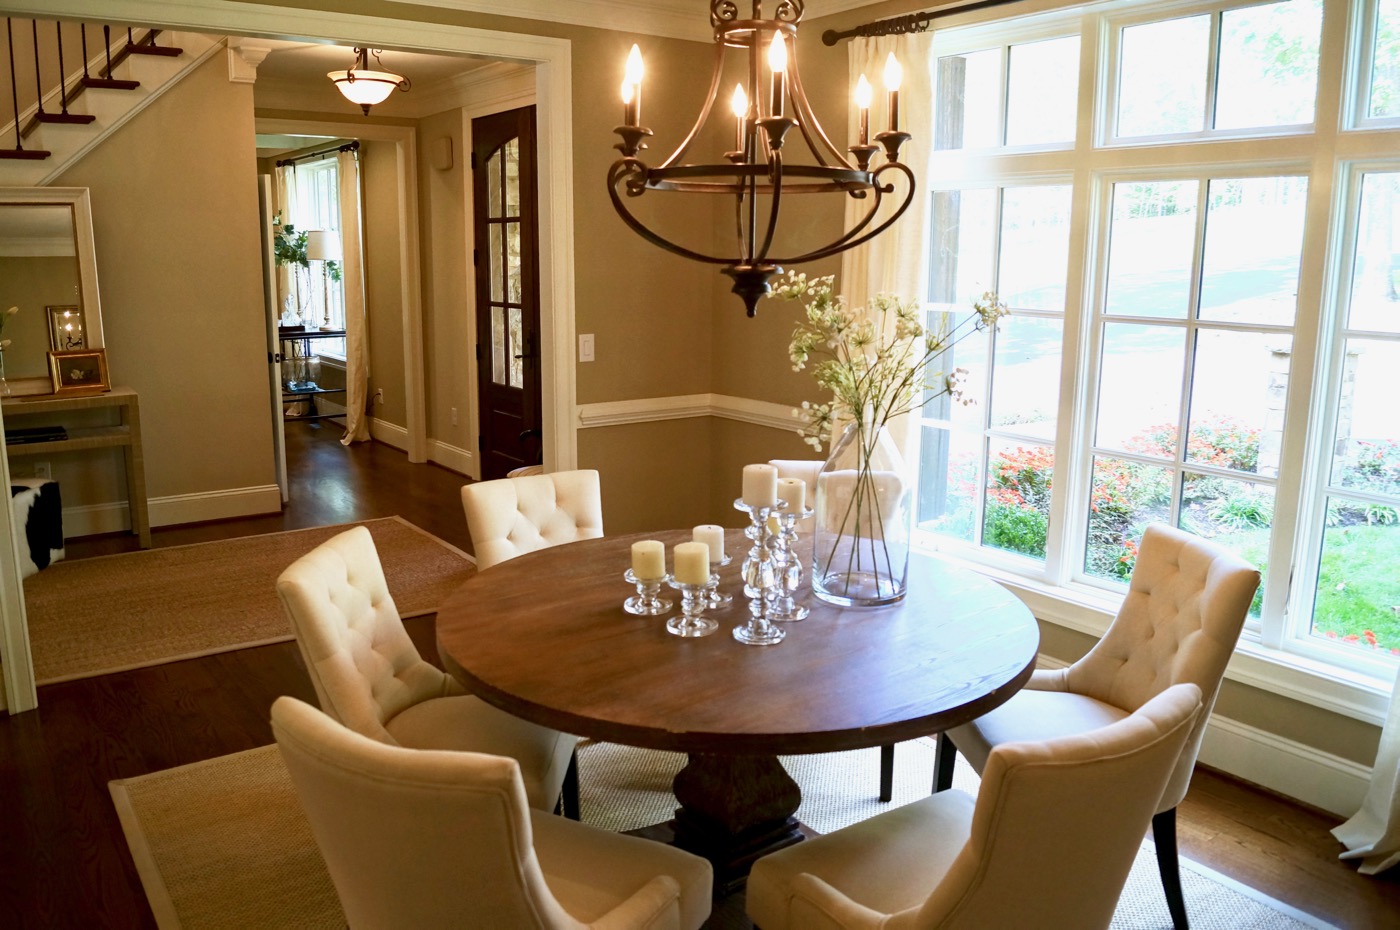 Using Wicker Dressers In Your Dining Room